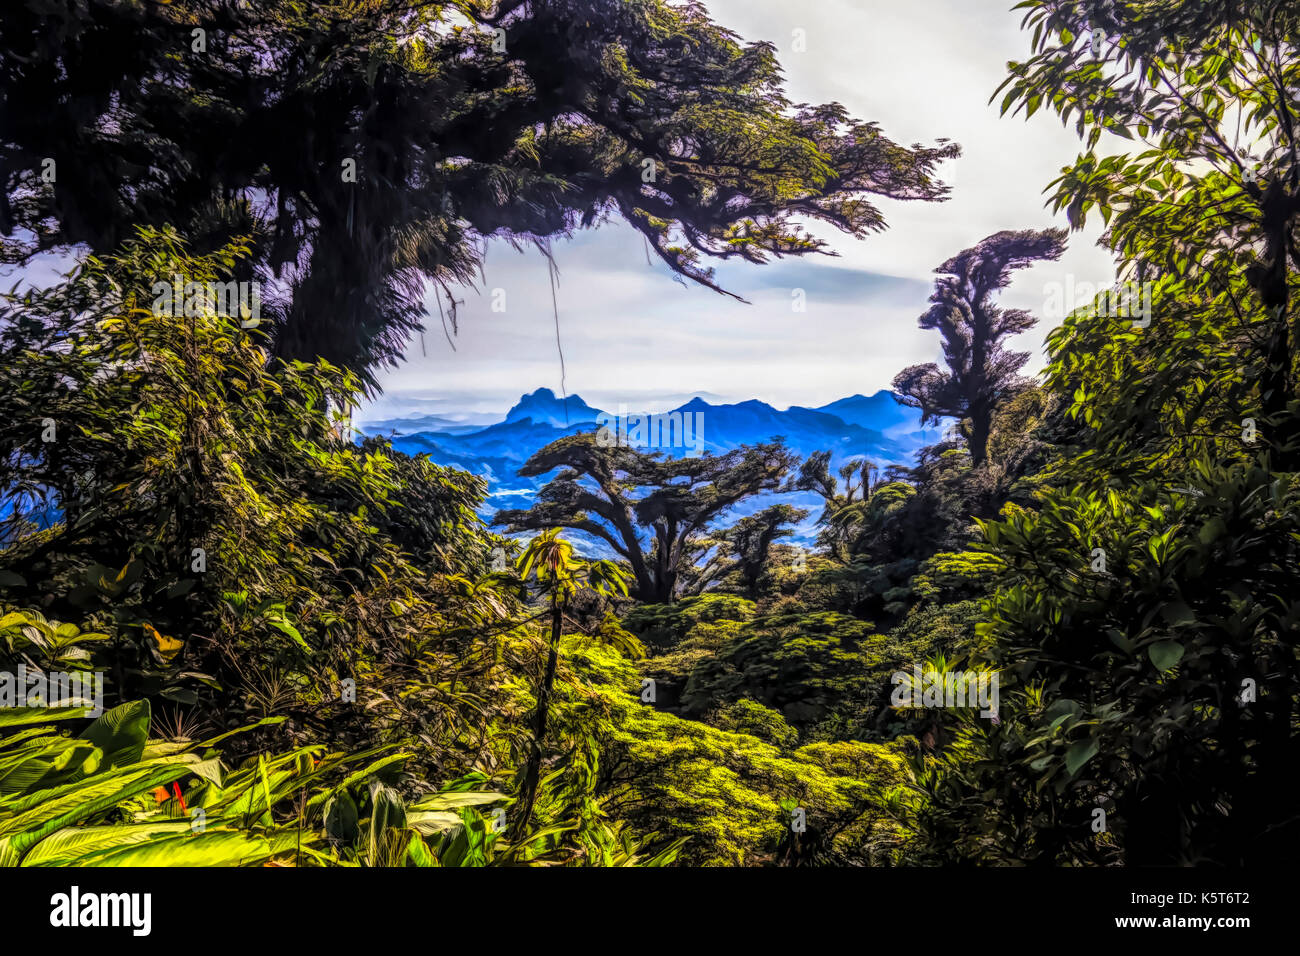 Cloud forest panorama landscape view illustration Stock Photo